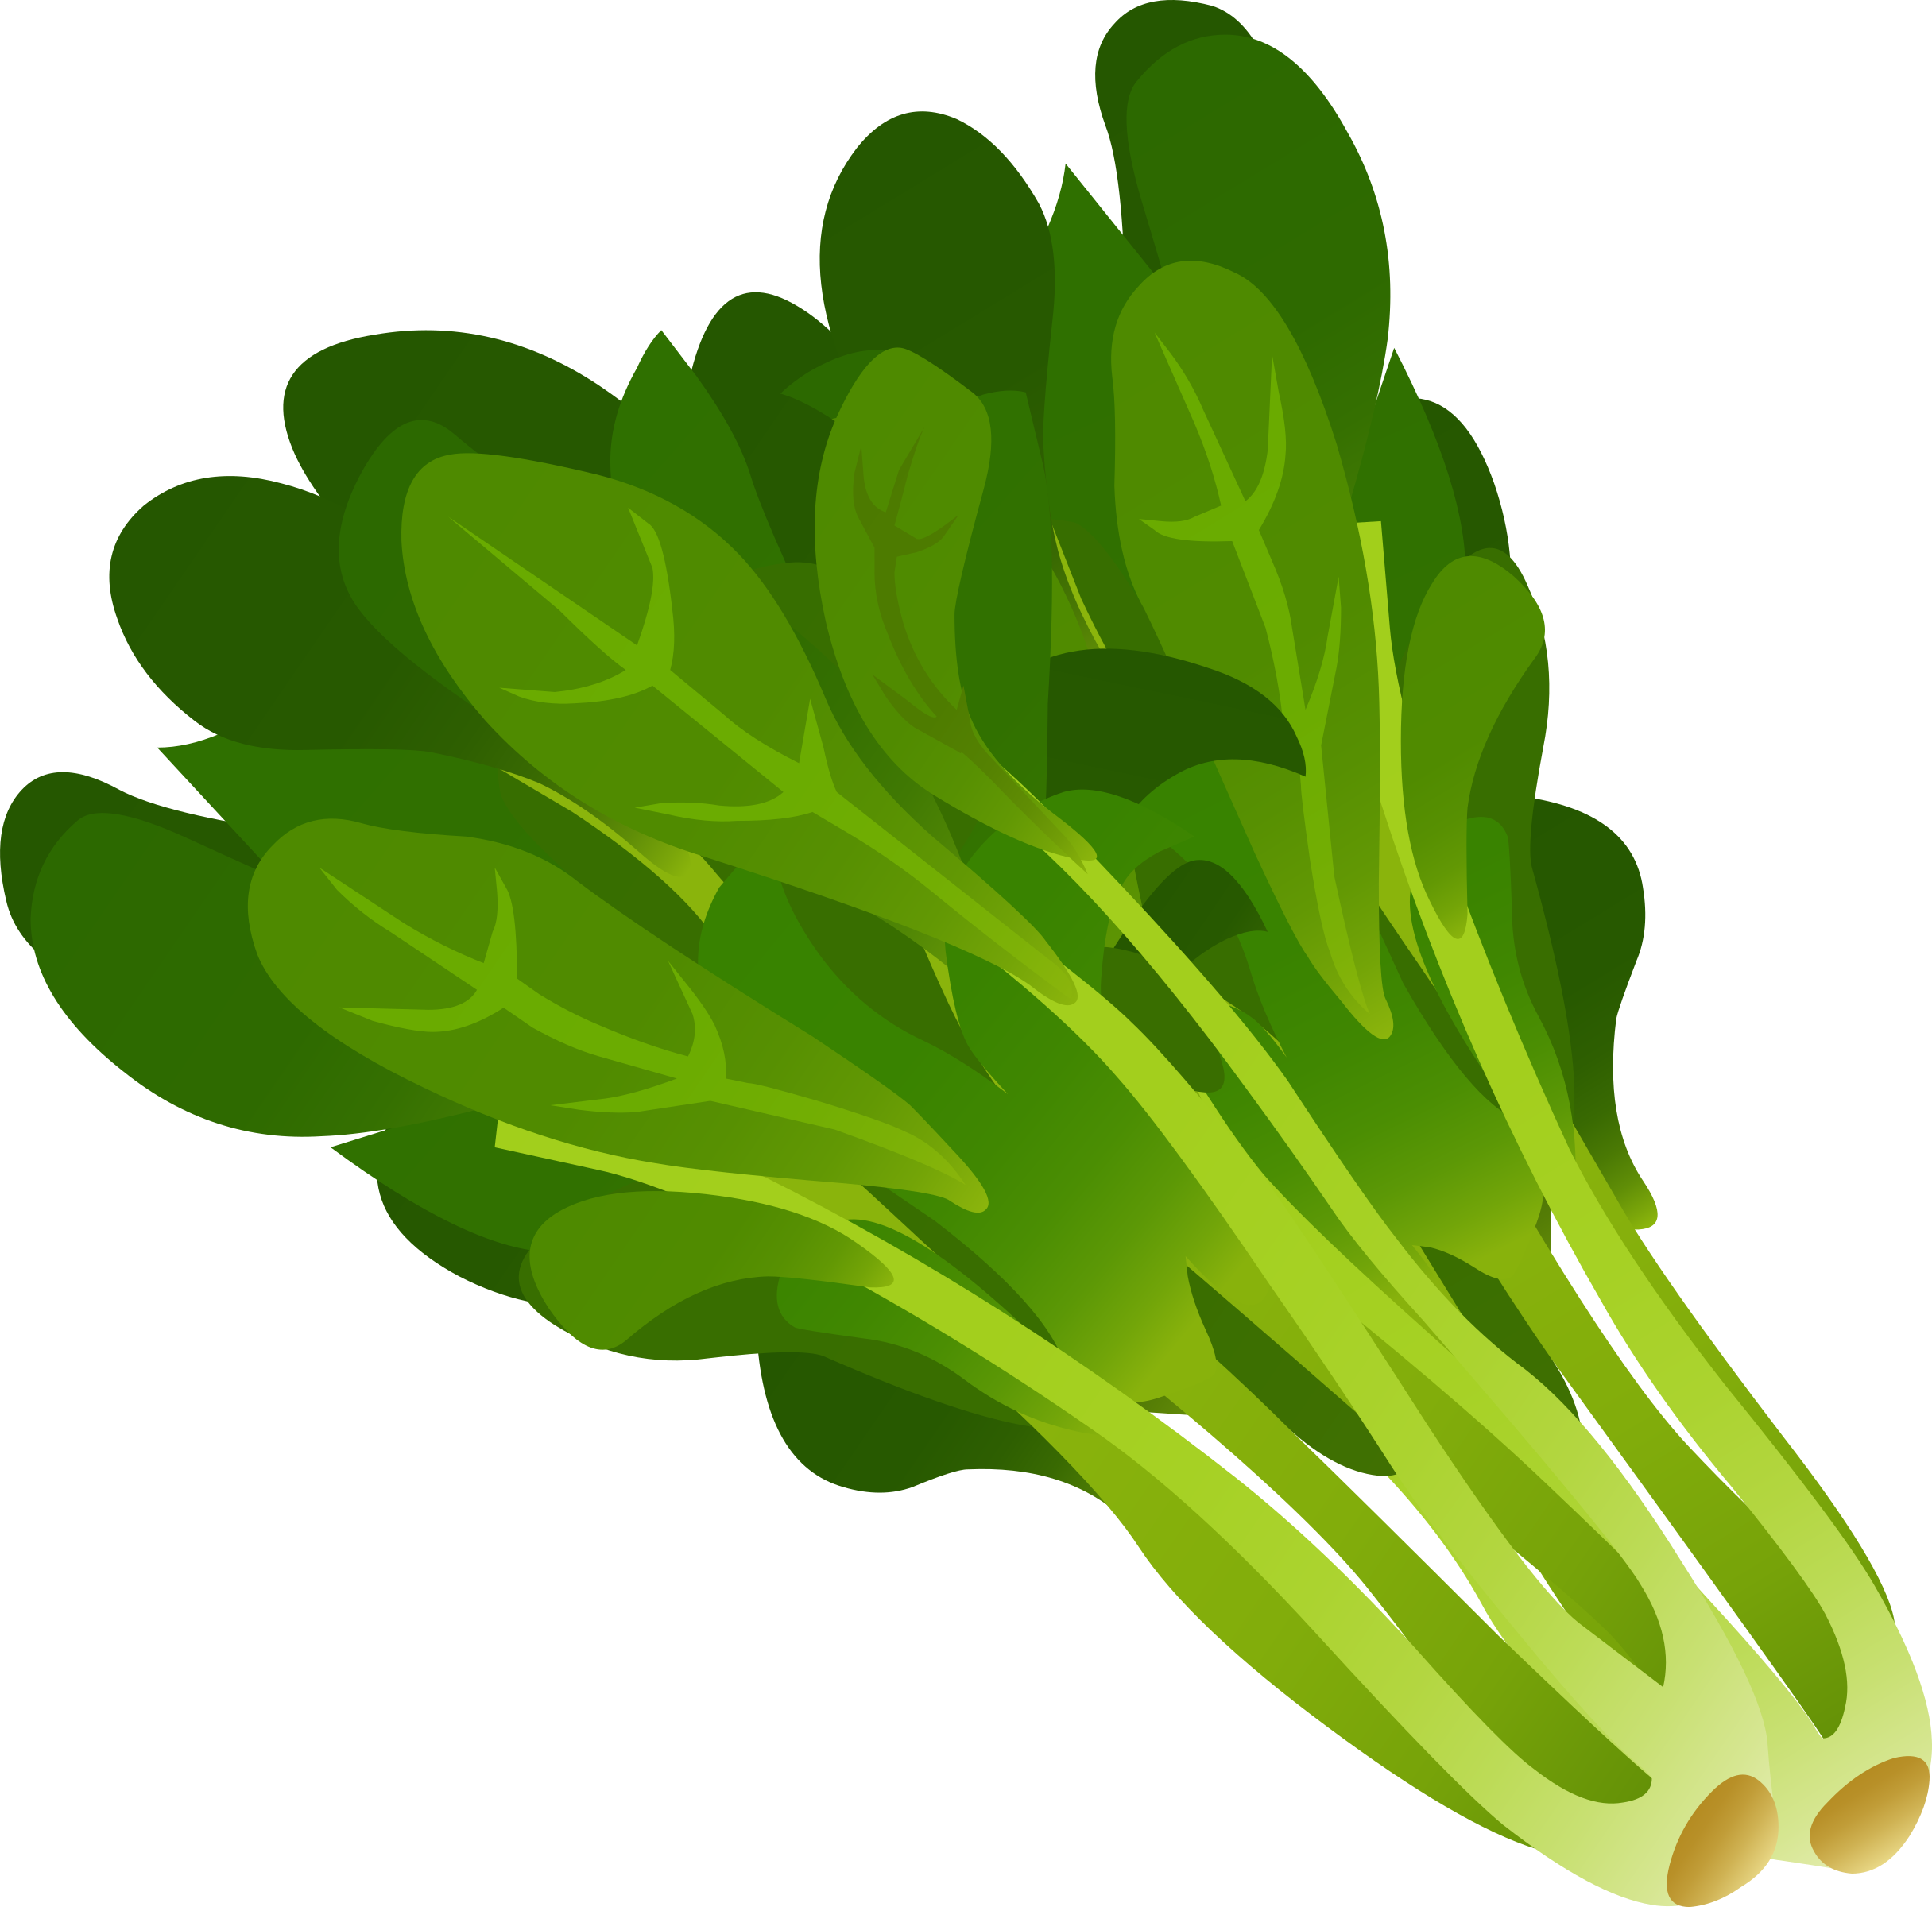 Lettuce clipart cartoon.  collection of spinach